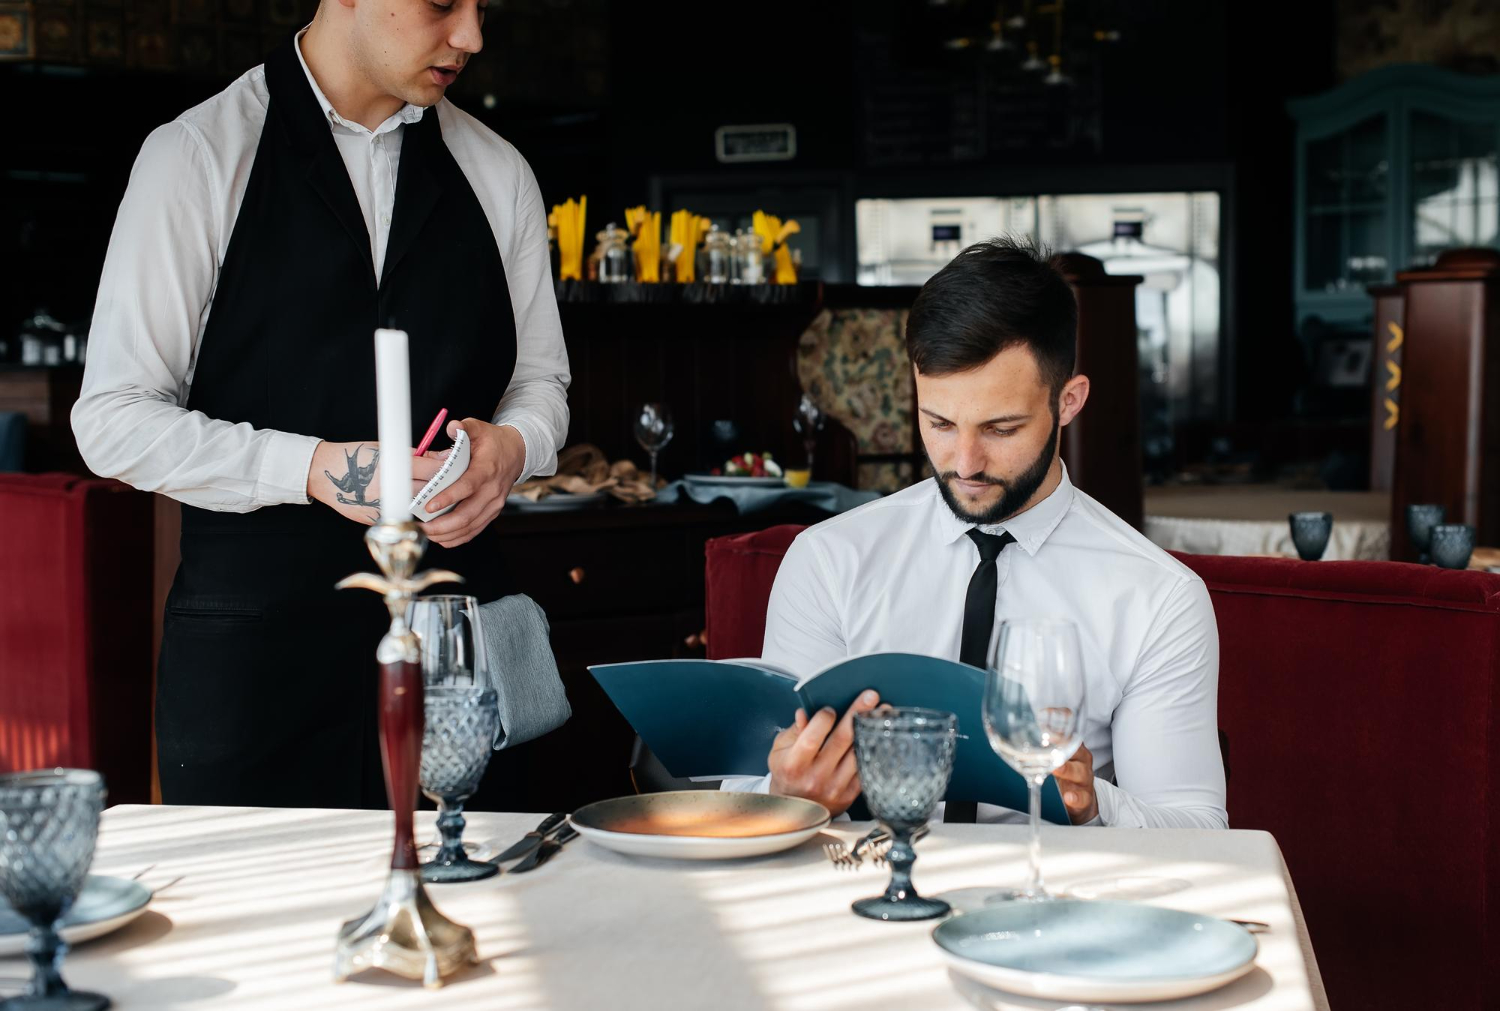 A male waiter stands next to man seated at a restaurant table. The man sitting down is wearing a white shirt and black tie and is reading a menu while the waiter waits to take his order.